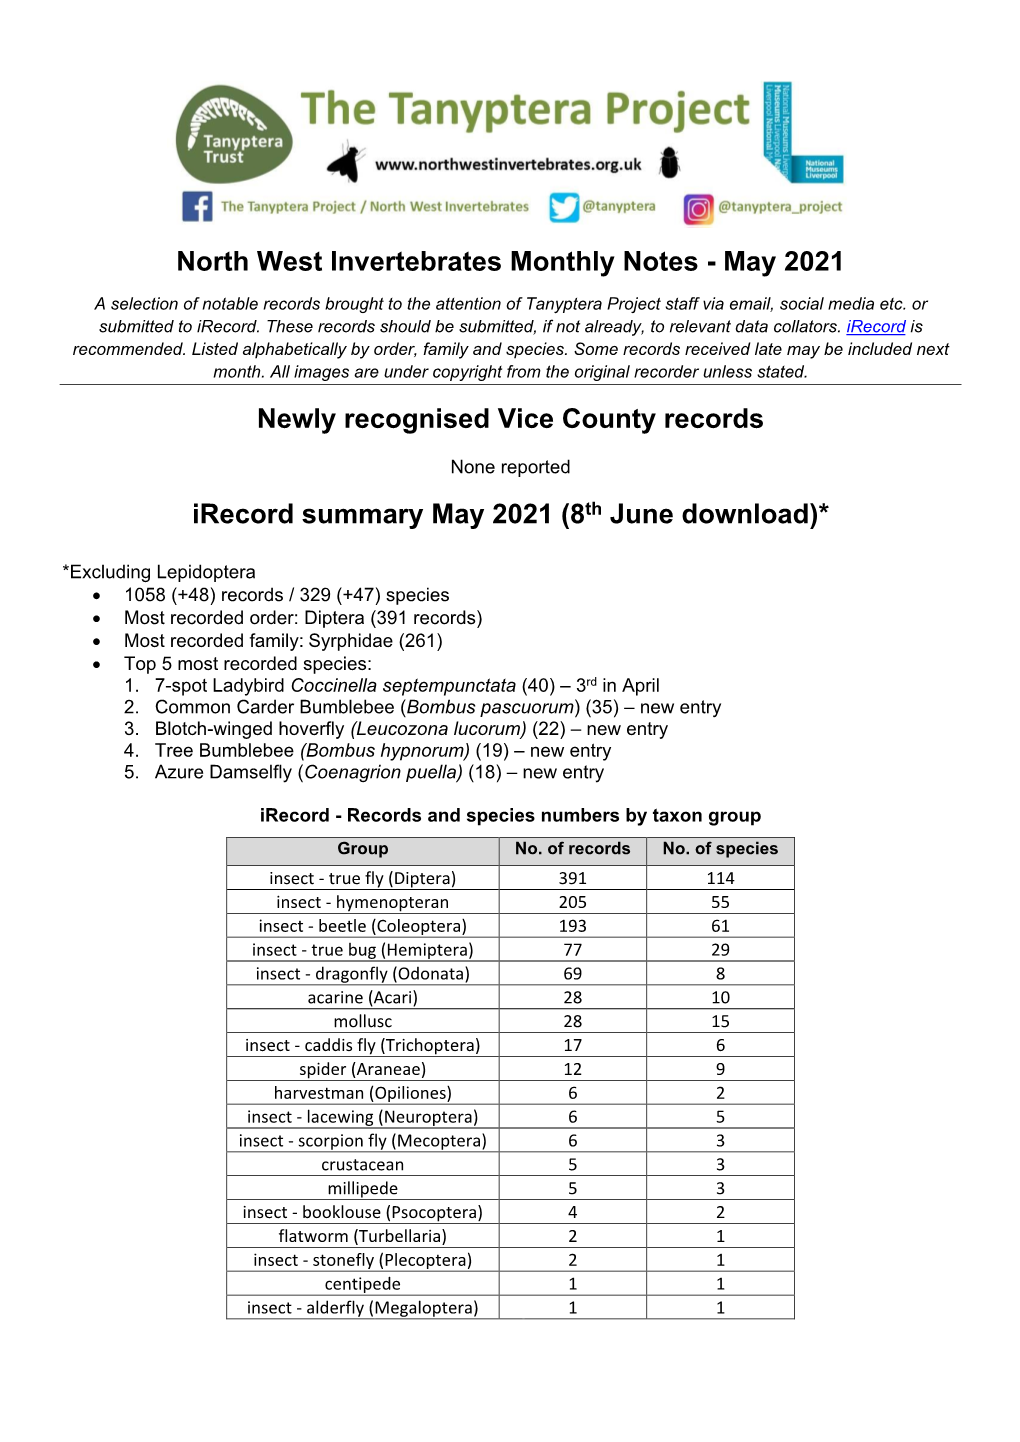 North West Invertebrates Monthly Notes - May 2021